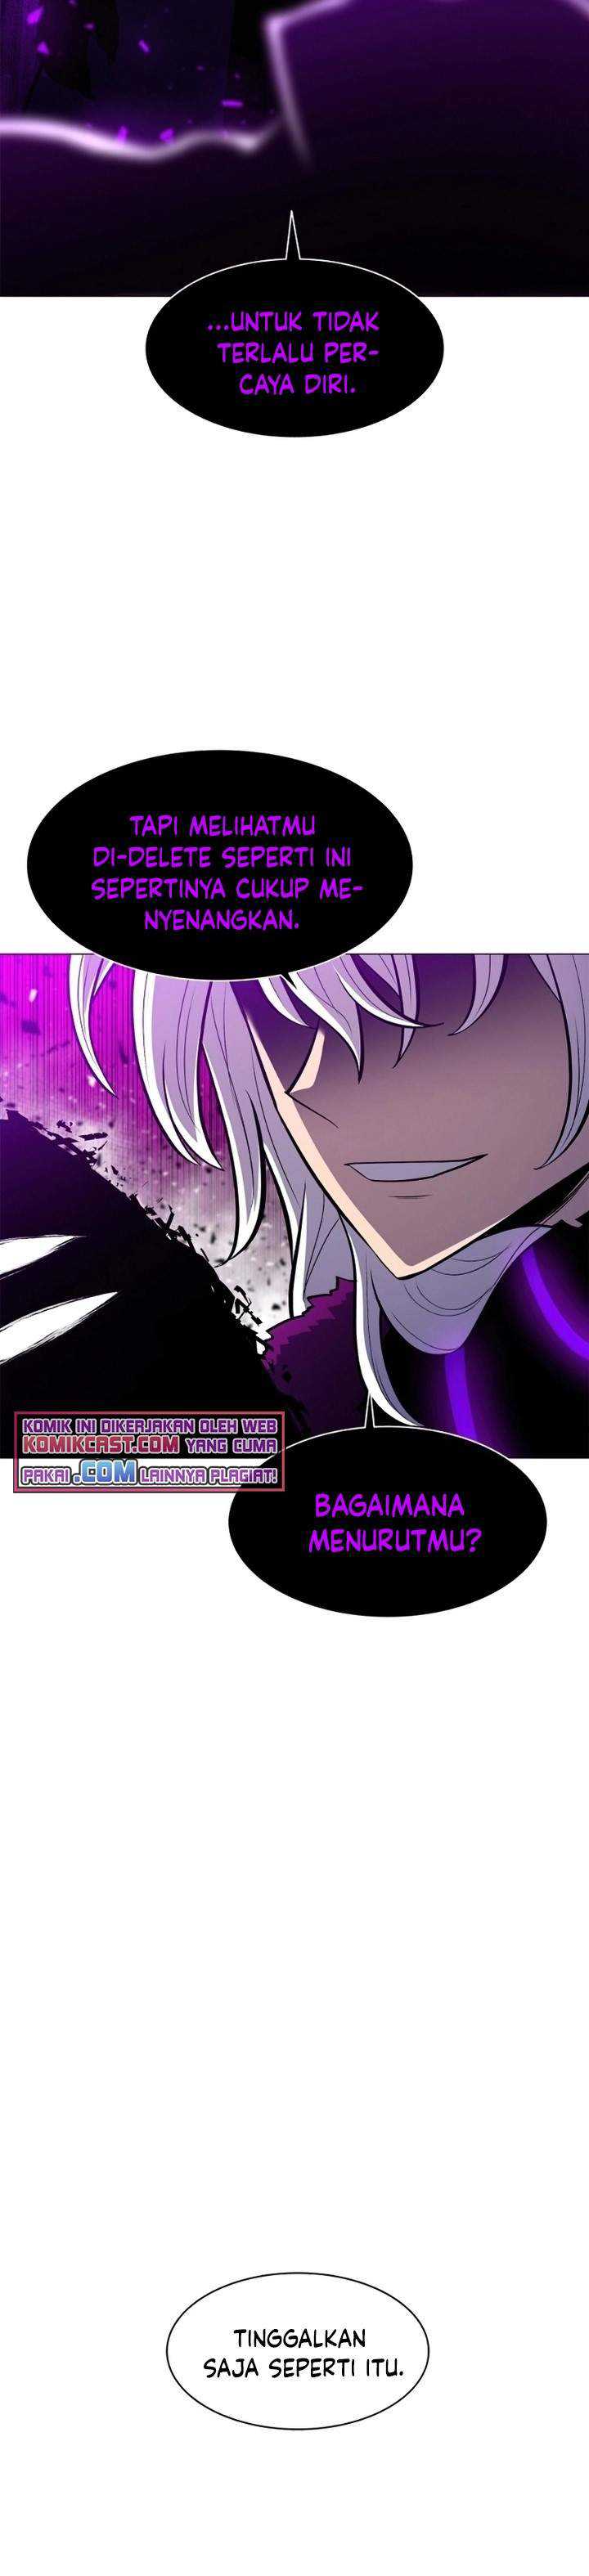 Updater Chapter 46